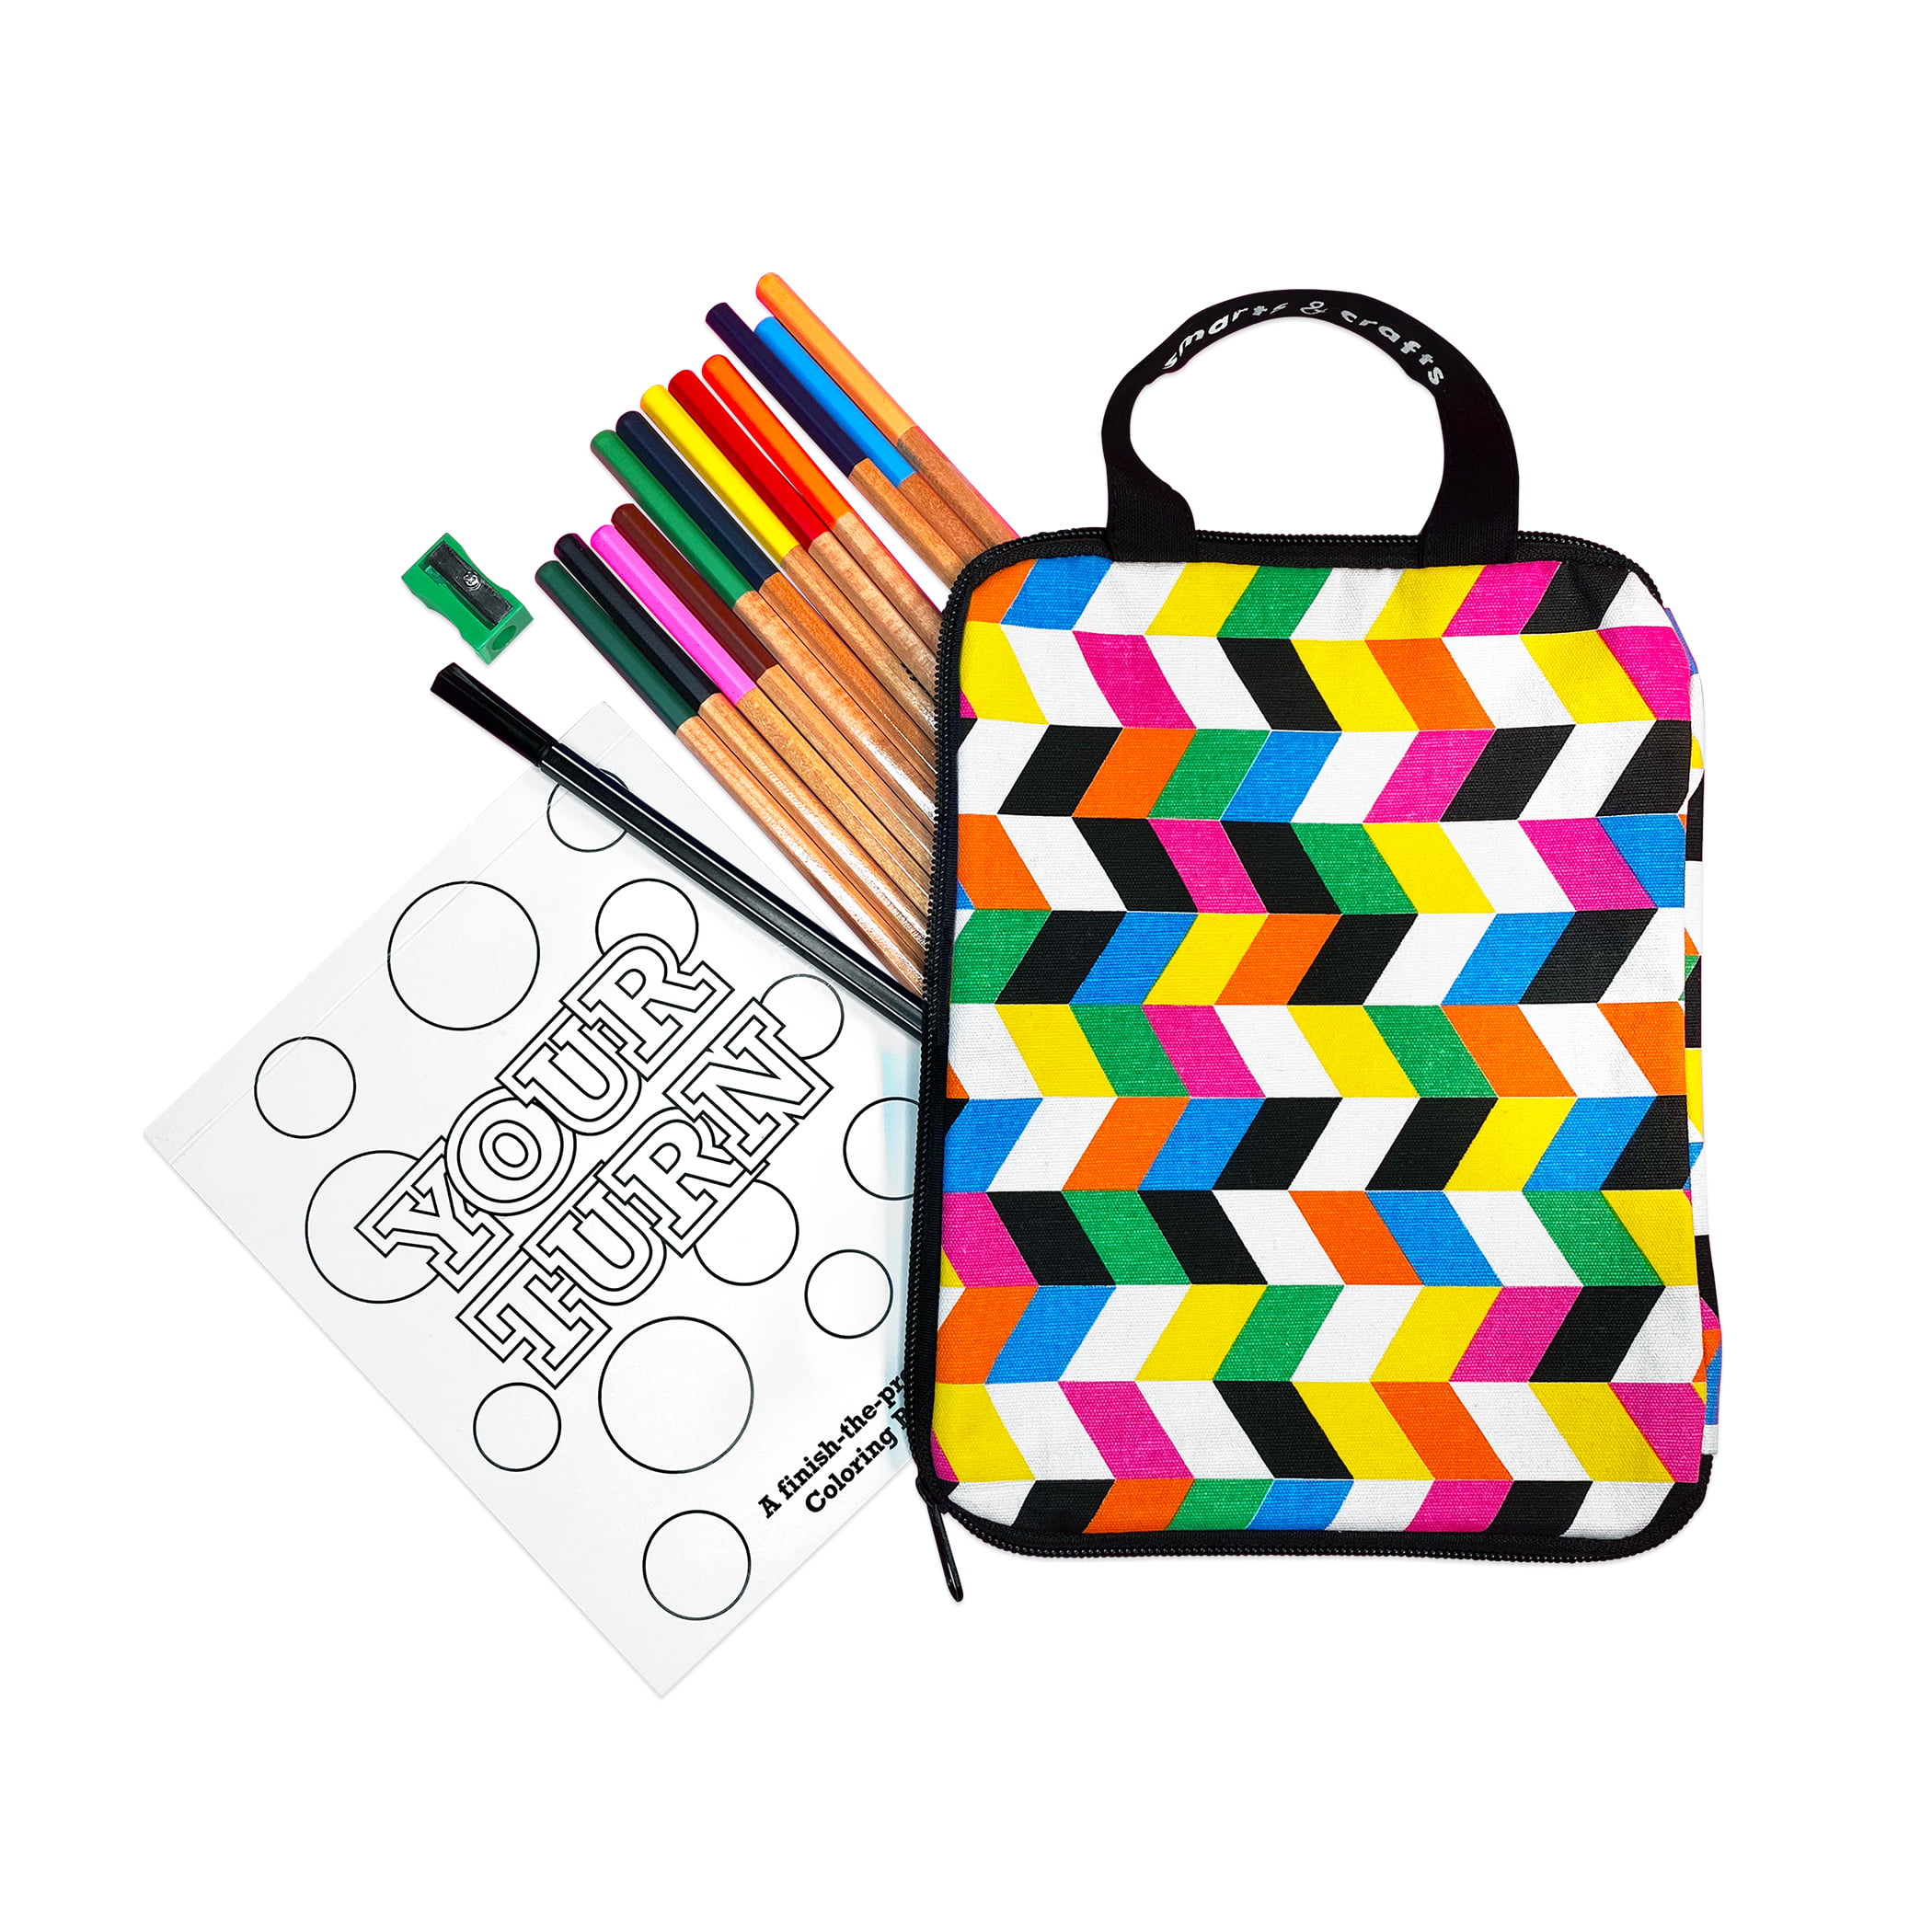 Smarts & Crafts Make Your Own Black and White Craft Kit (233 Pieces) 